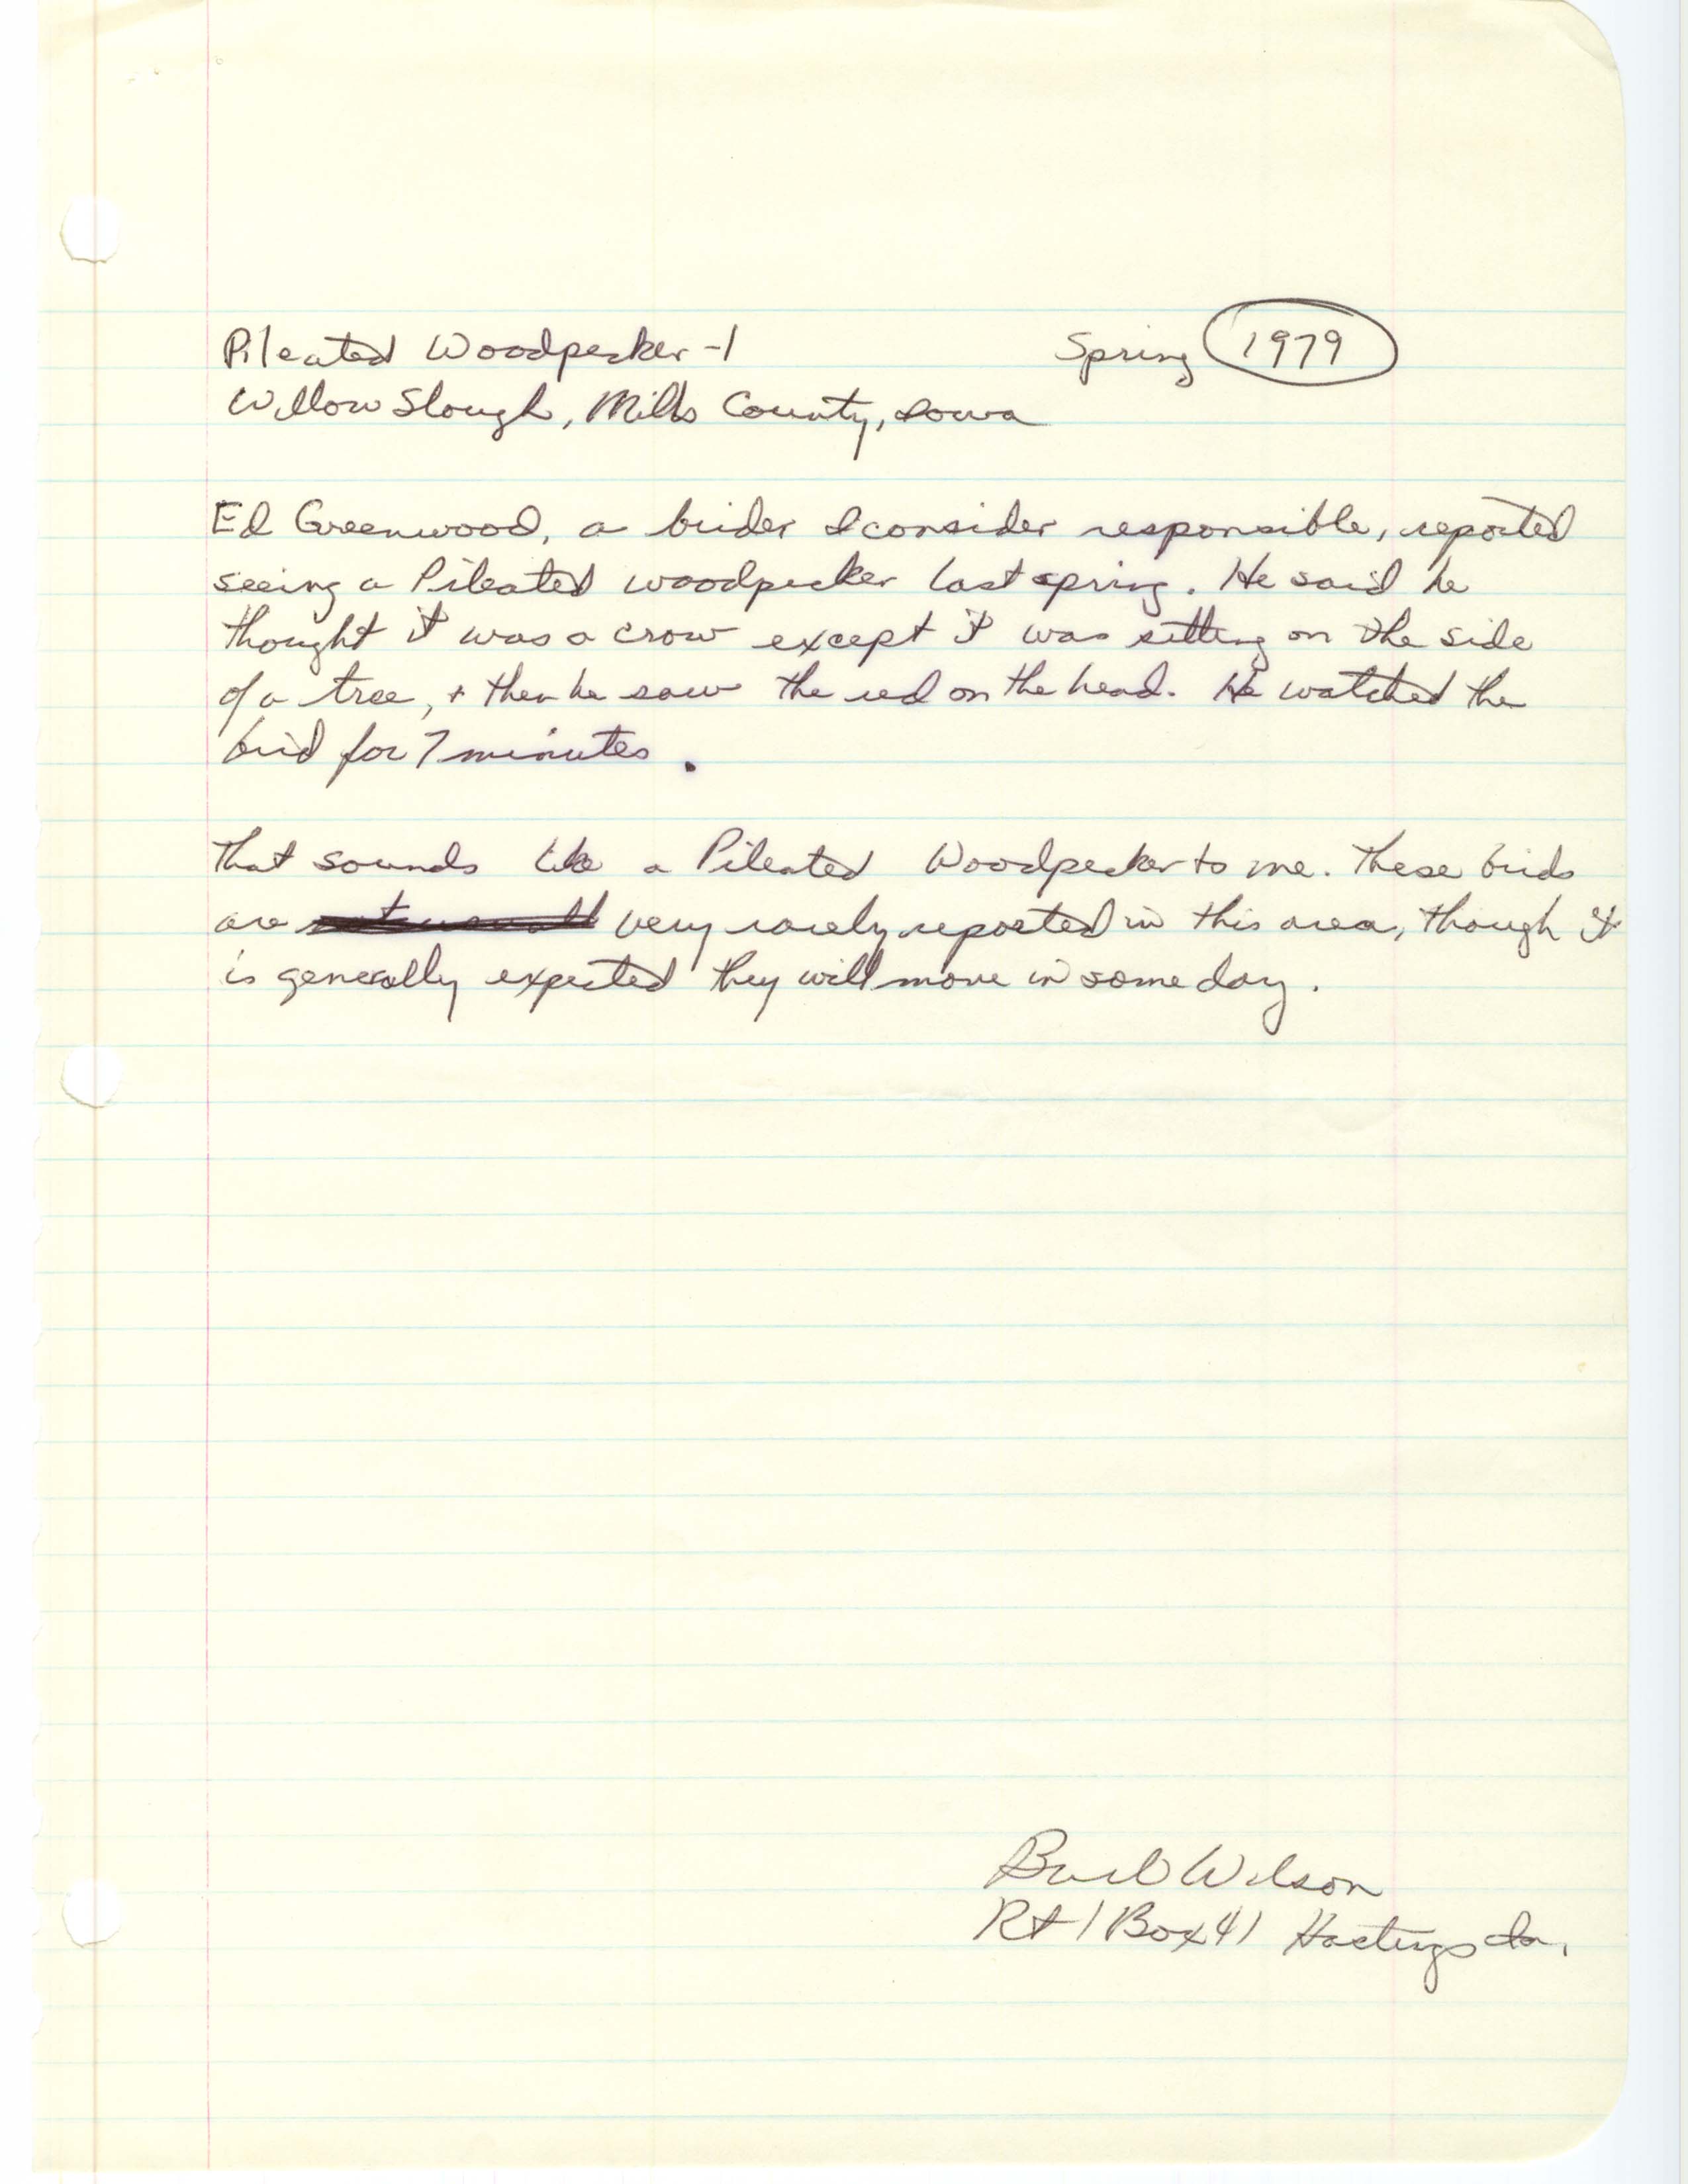 Field notes for Pileated Woodpecker at Willow Slough, Spring 1979